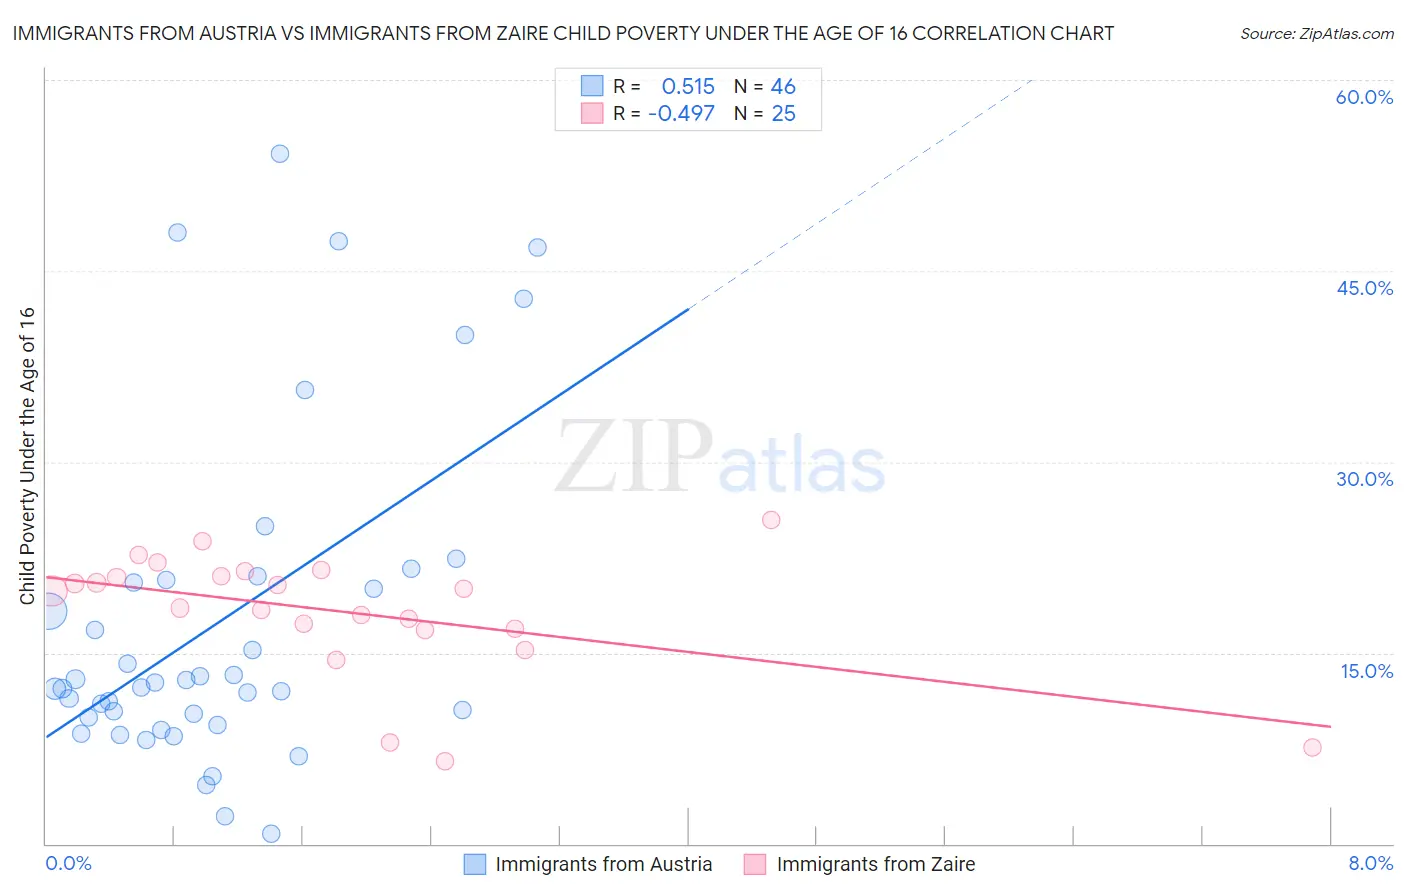 Immigrants from Austria vs Immigrants from Zaire Child Poverty Under the Age of 16